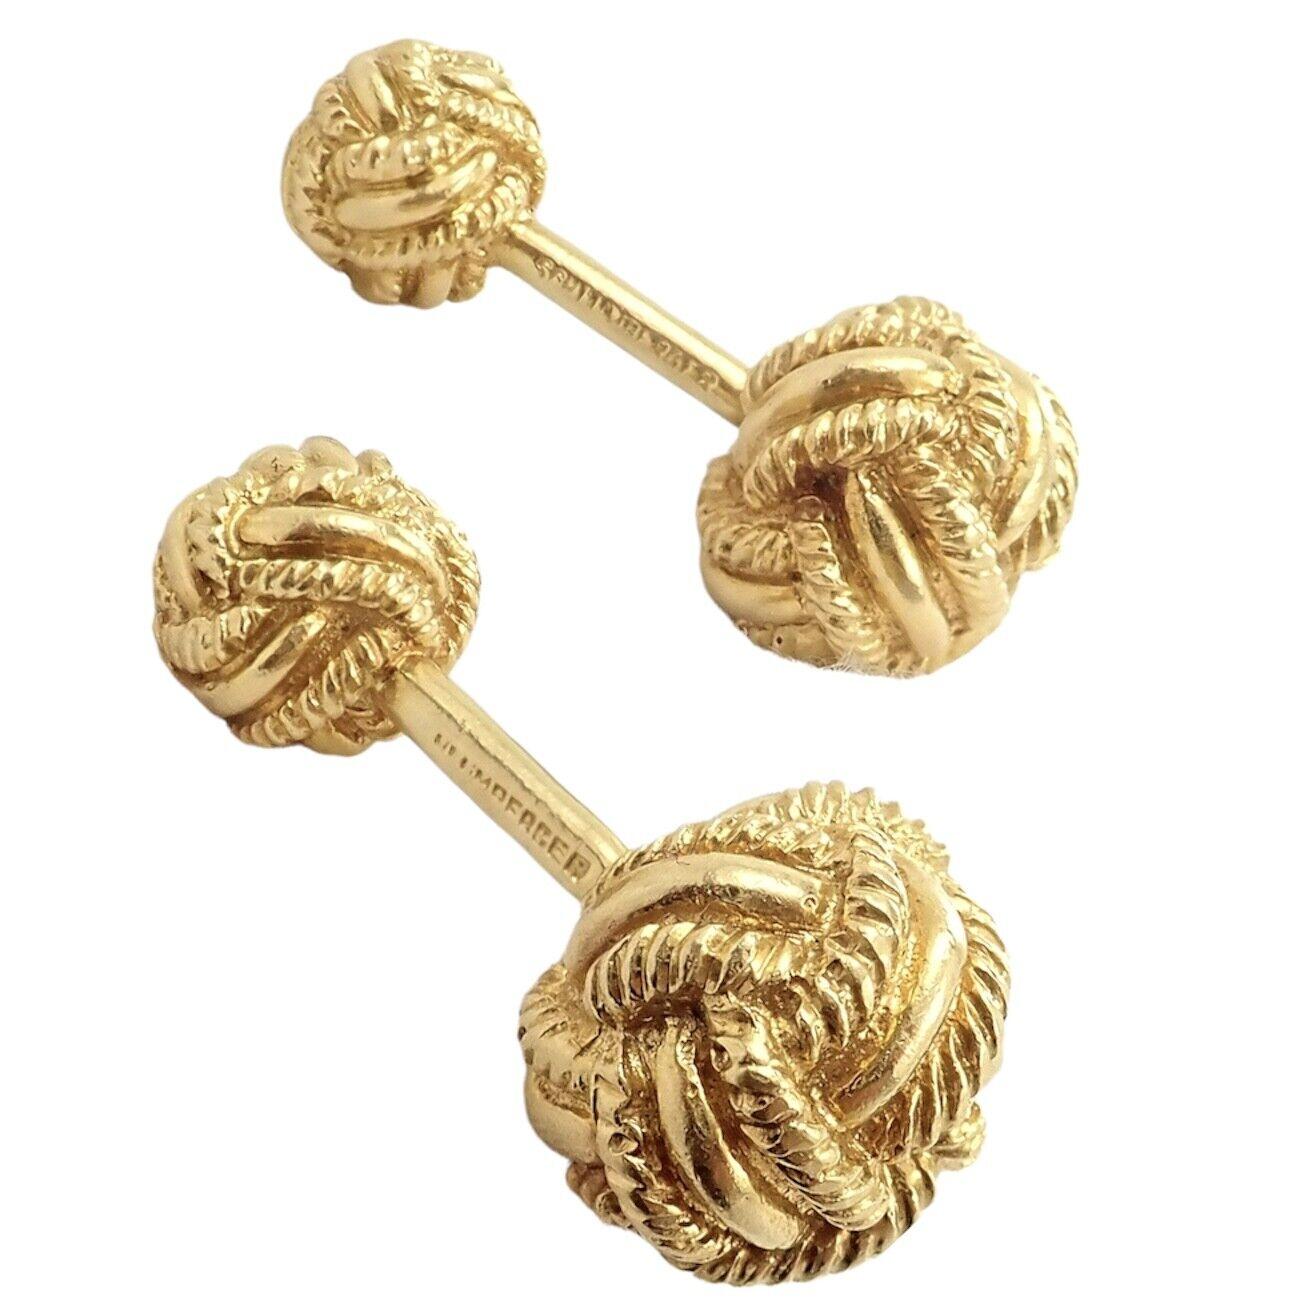 18k Yellow Gold Jean Schlumberger Vintage Rope Knot Cufflinks by Tiffany & Co. 
Details: 
Dimensions: 27mm x 12mm
Size: Front: 12mm, Back: 8mm
Weight: 18 grams
Stamped Hallmarks: Tiffany 18k Schlumberger 
*Free Shipping within the United